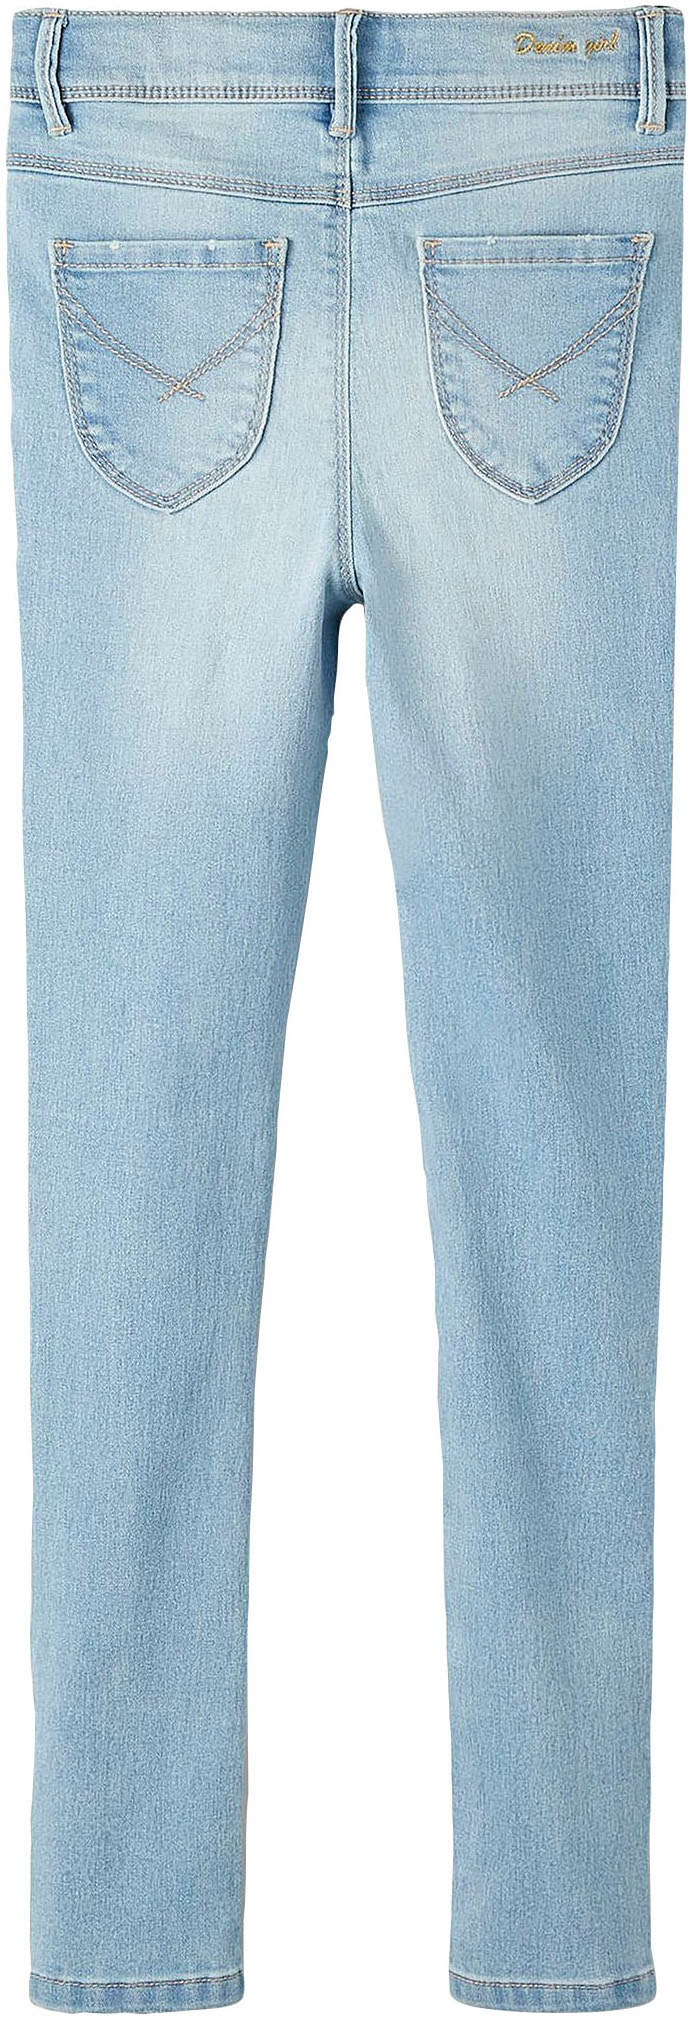 HW Name PB« Skinny-fit-Jeans bei PANT OTTO DNMTHRIS »NKFPOLLY It